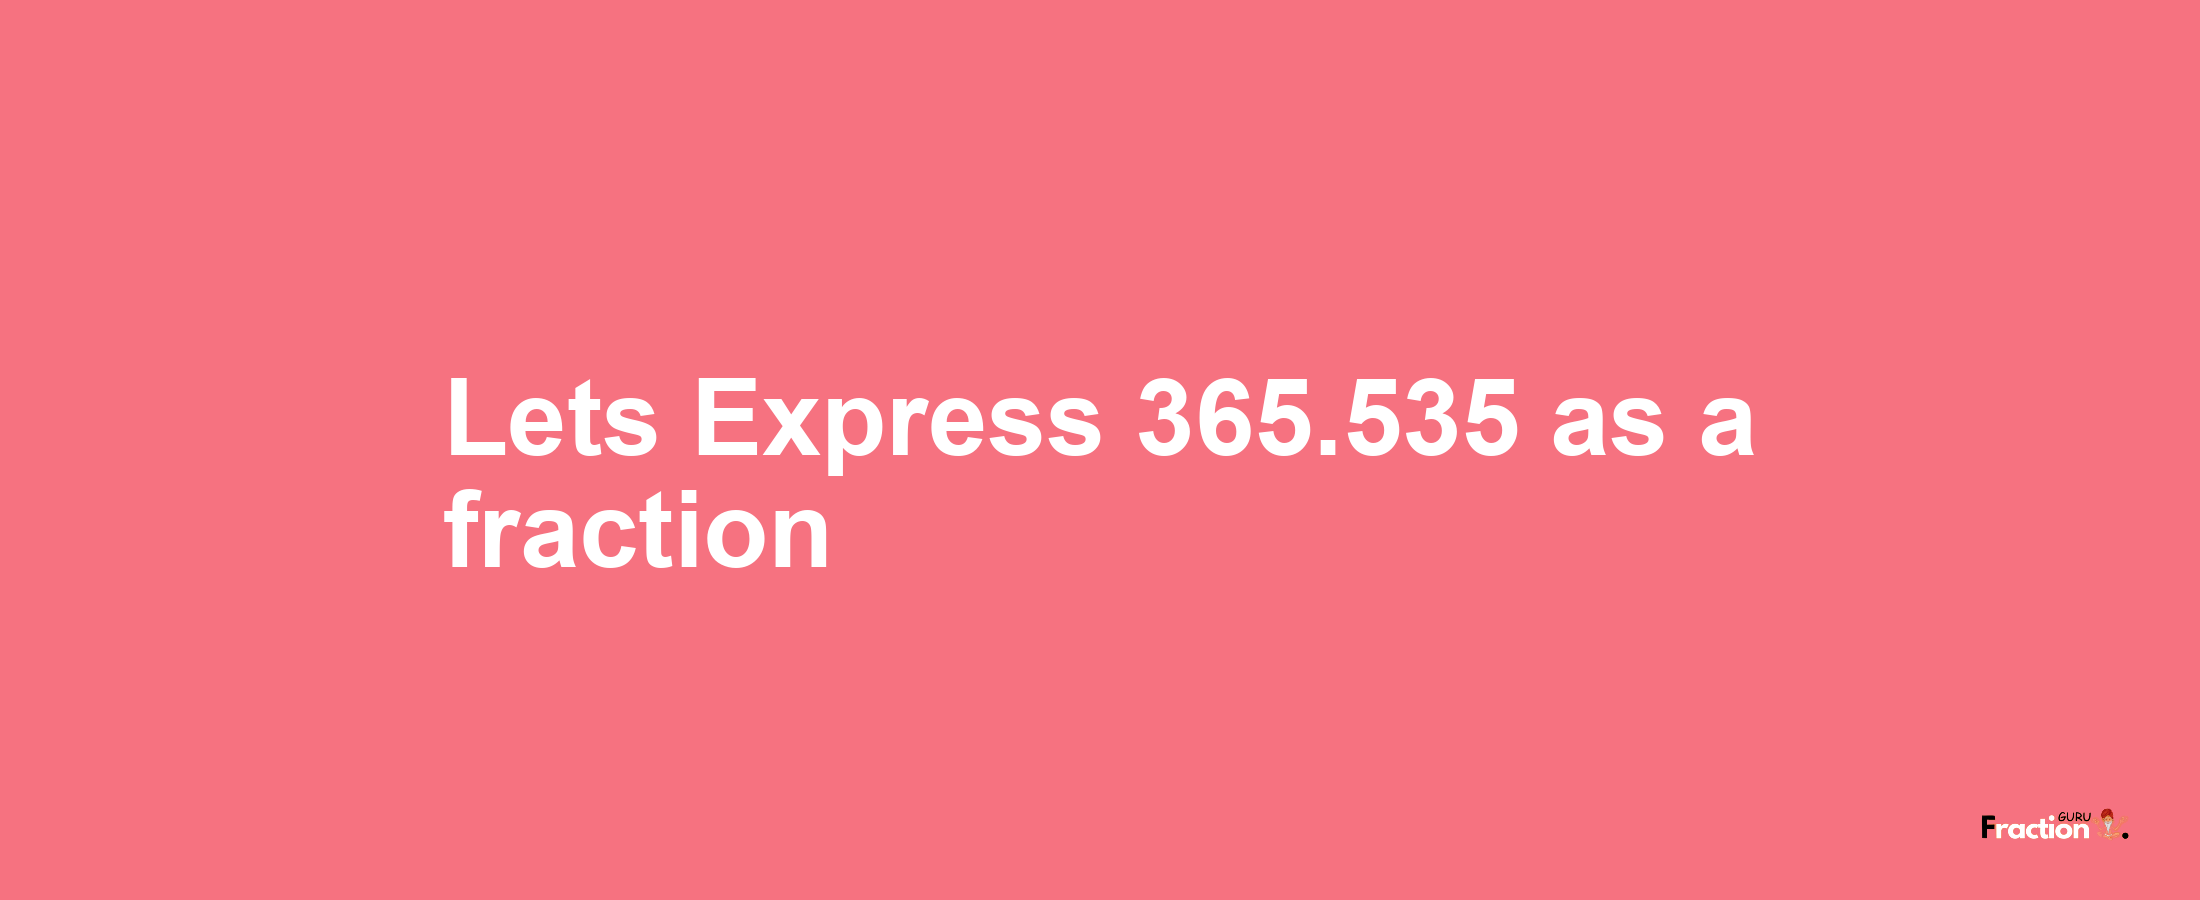 Lets Express 365.535 as afraction